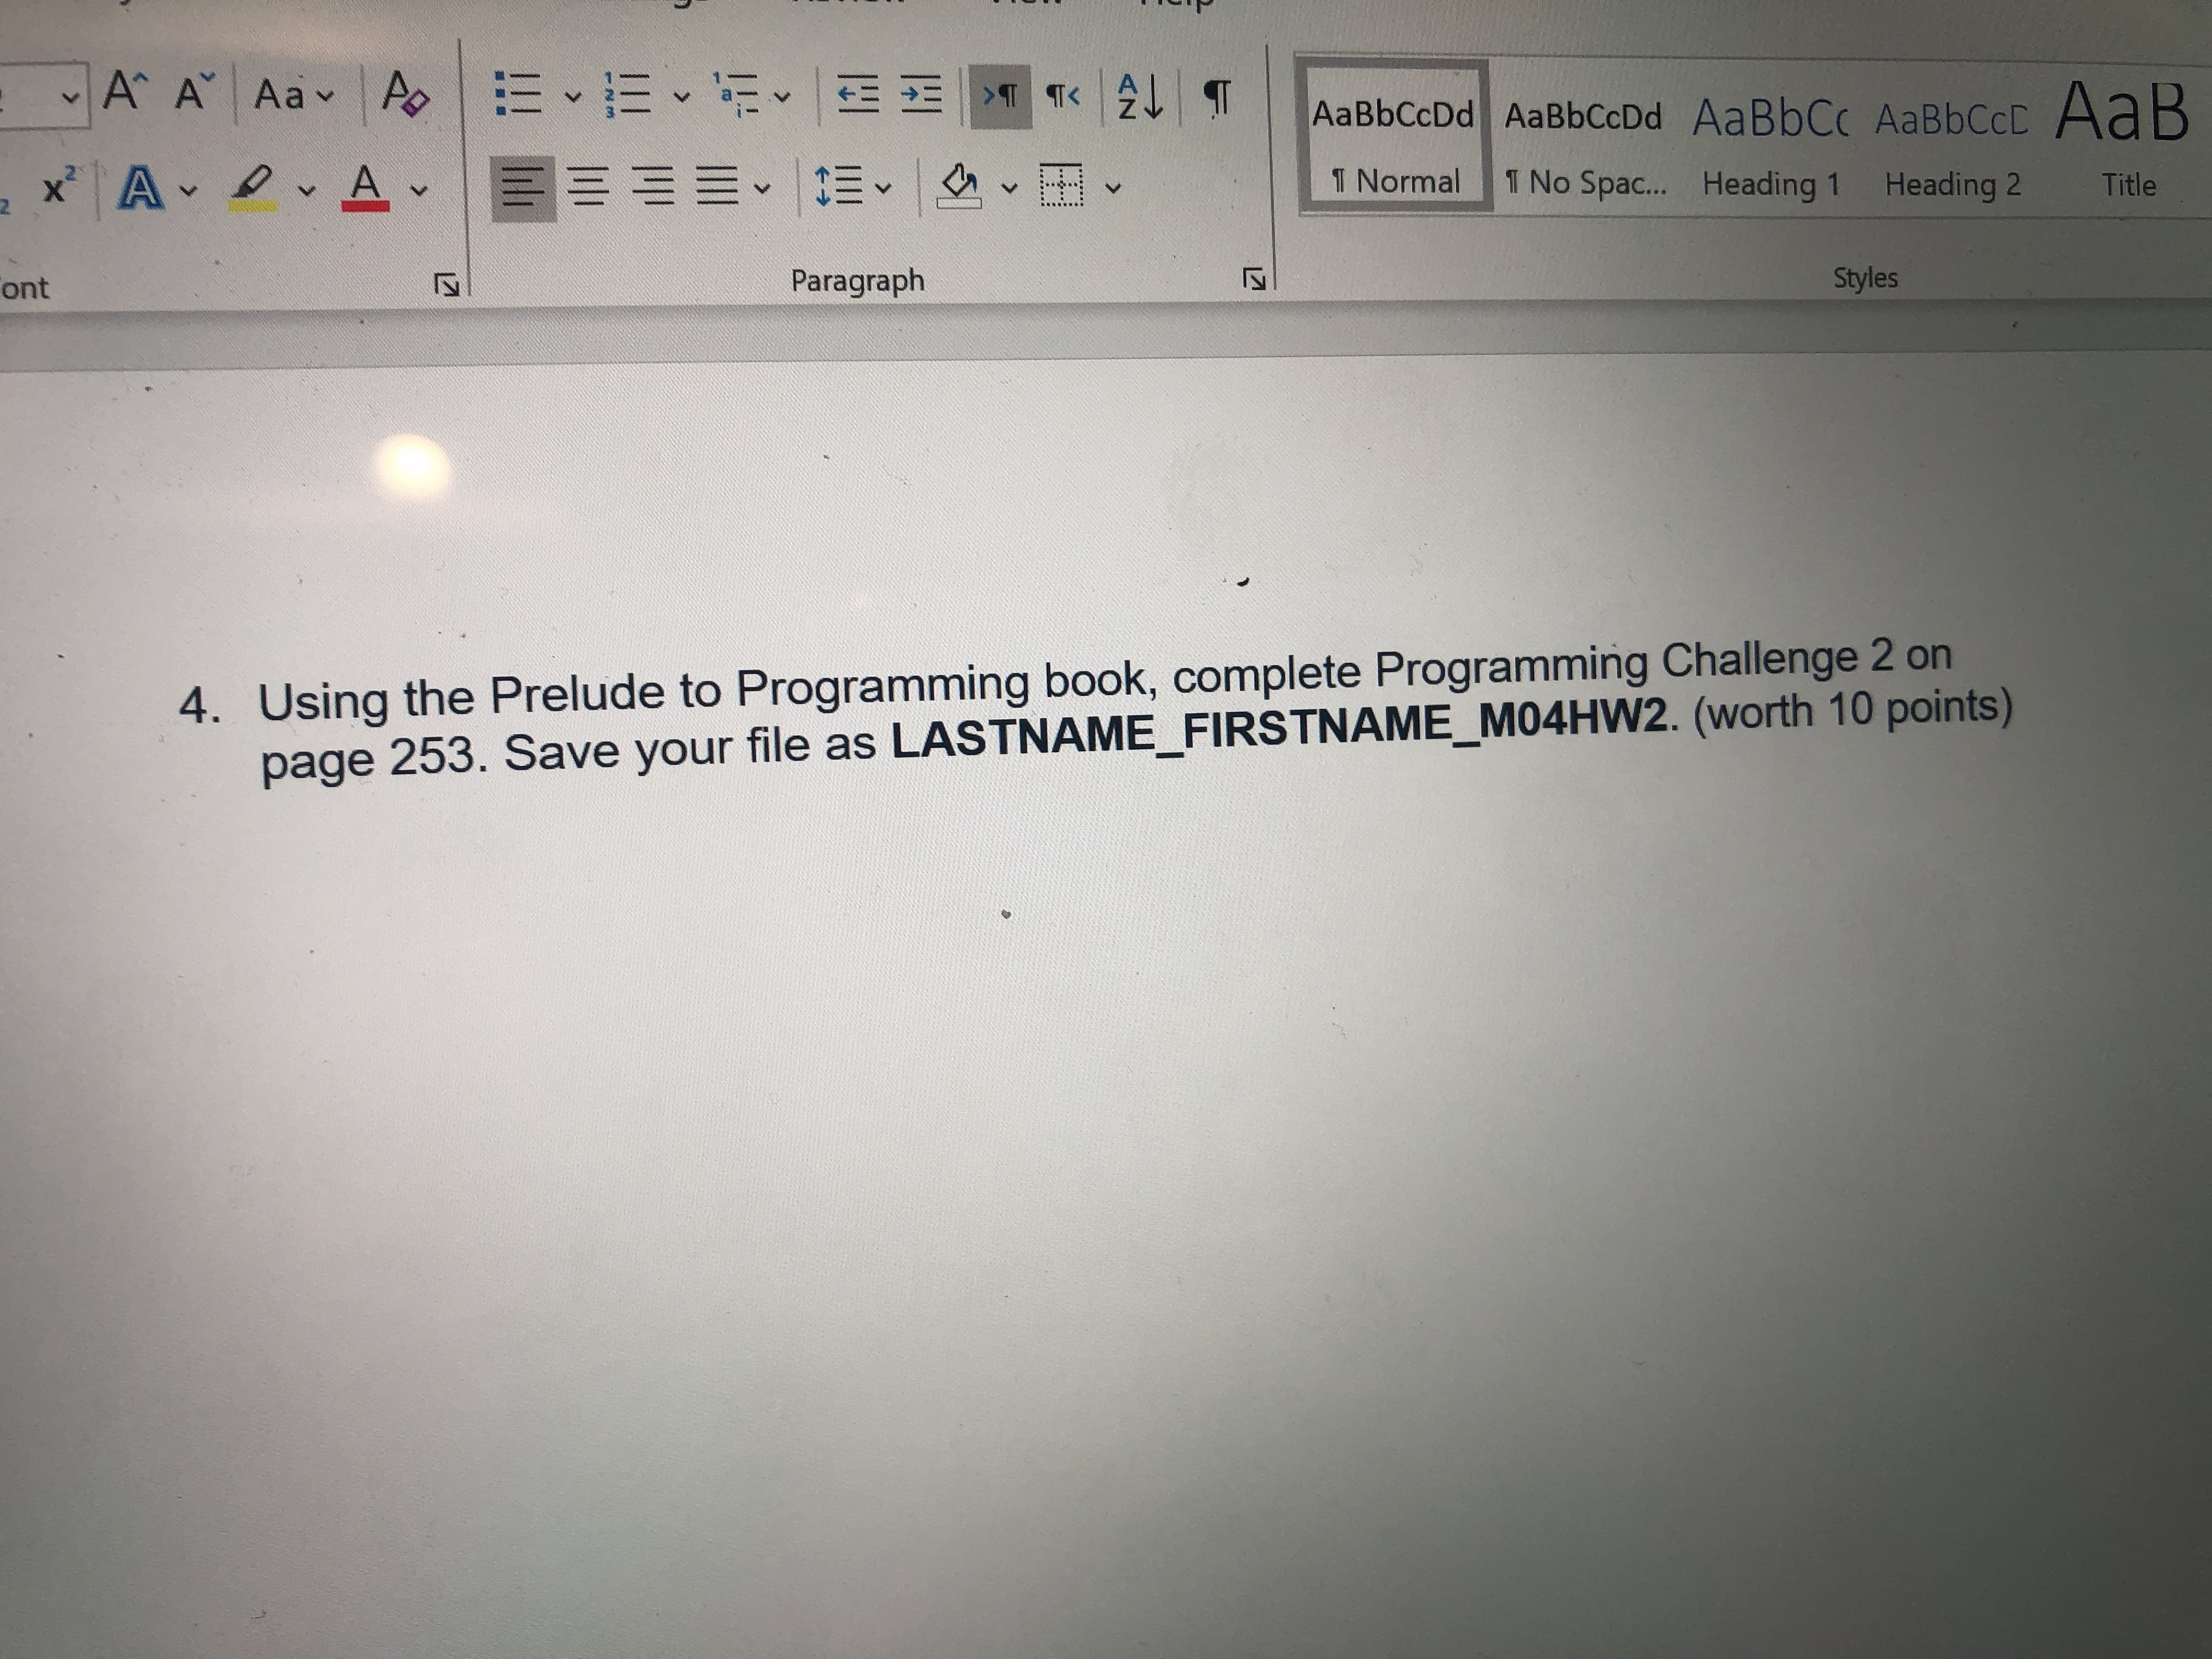 A A Aav
AaB
AaBbCcDd AaBbCcDd AaBbCc AABBCCD
x A A-
1 Normal
1 No Spac...
Heading 2
Heading 1
Title
Styles
Paragraph
ont
4. Using the Prelude to Programming book, complete Programming Challenge 2 on
page 253. Save your file as LASTNAME_FIRSTNAME_M04HW2. (worth 10 points)
